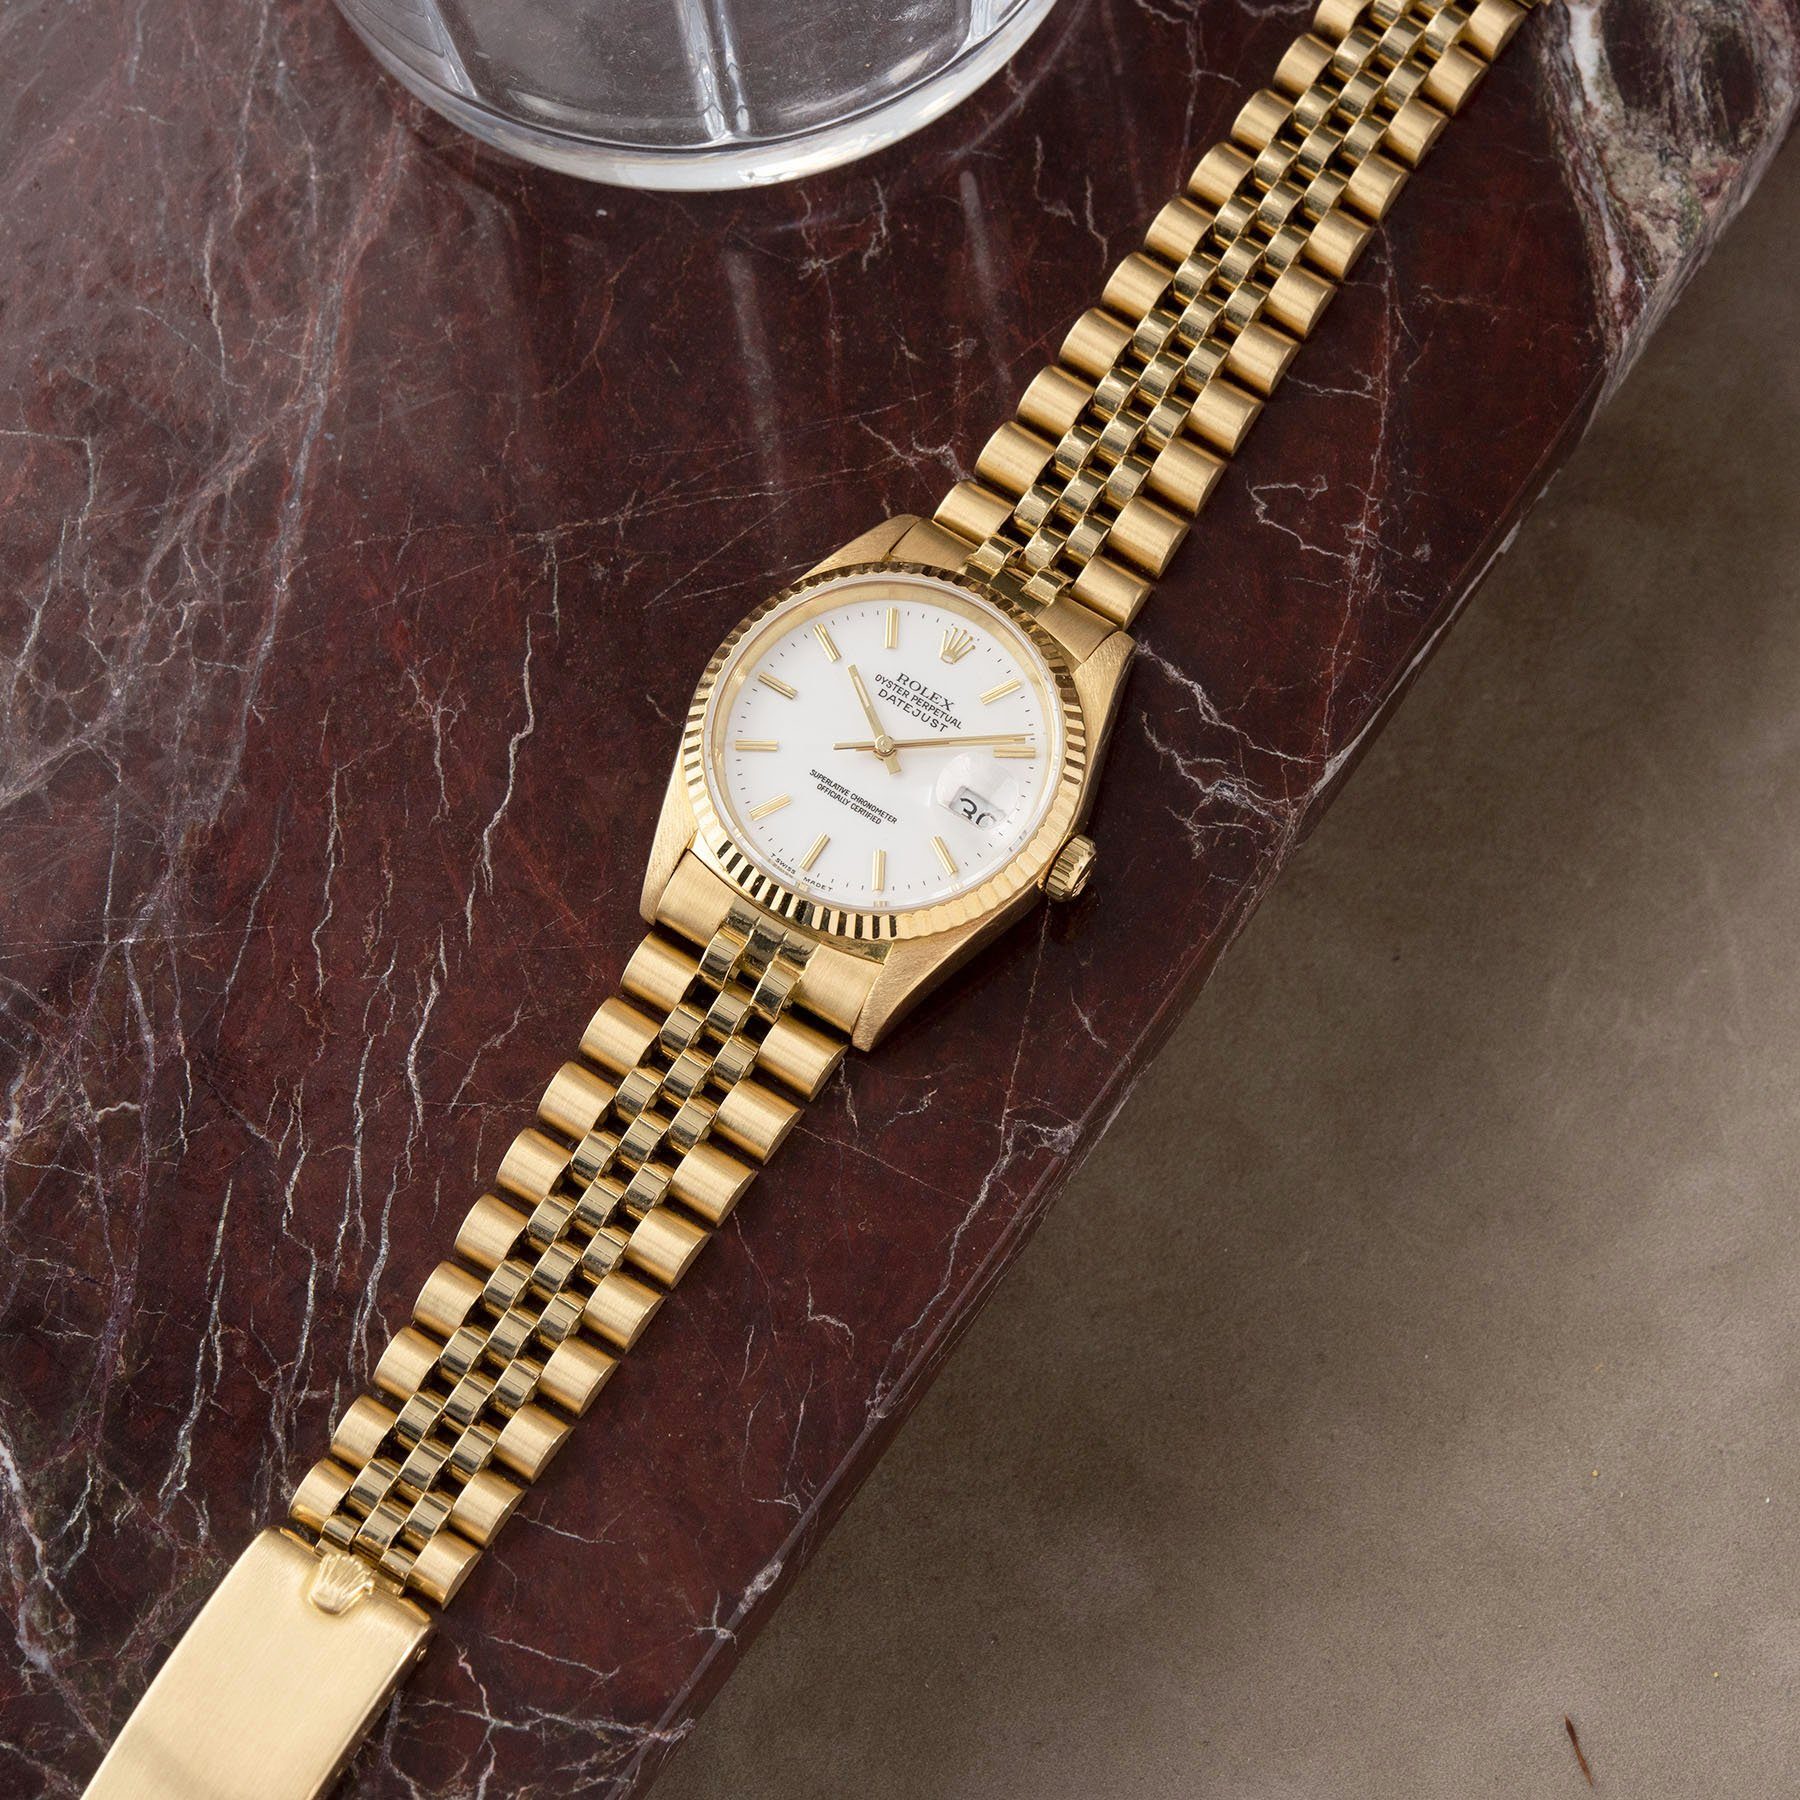 Rolex Datejust Yellow Gold with White Porcelain Dial 16238